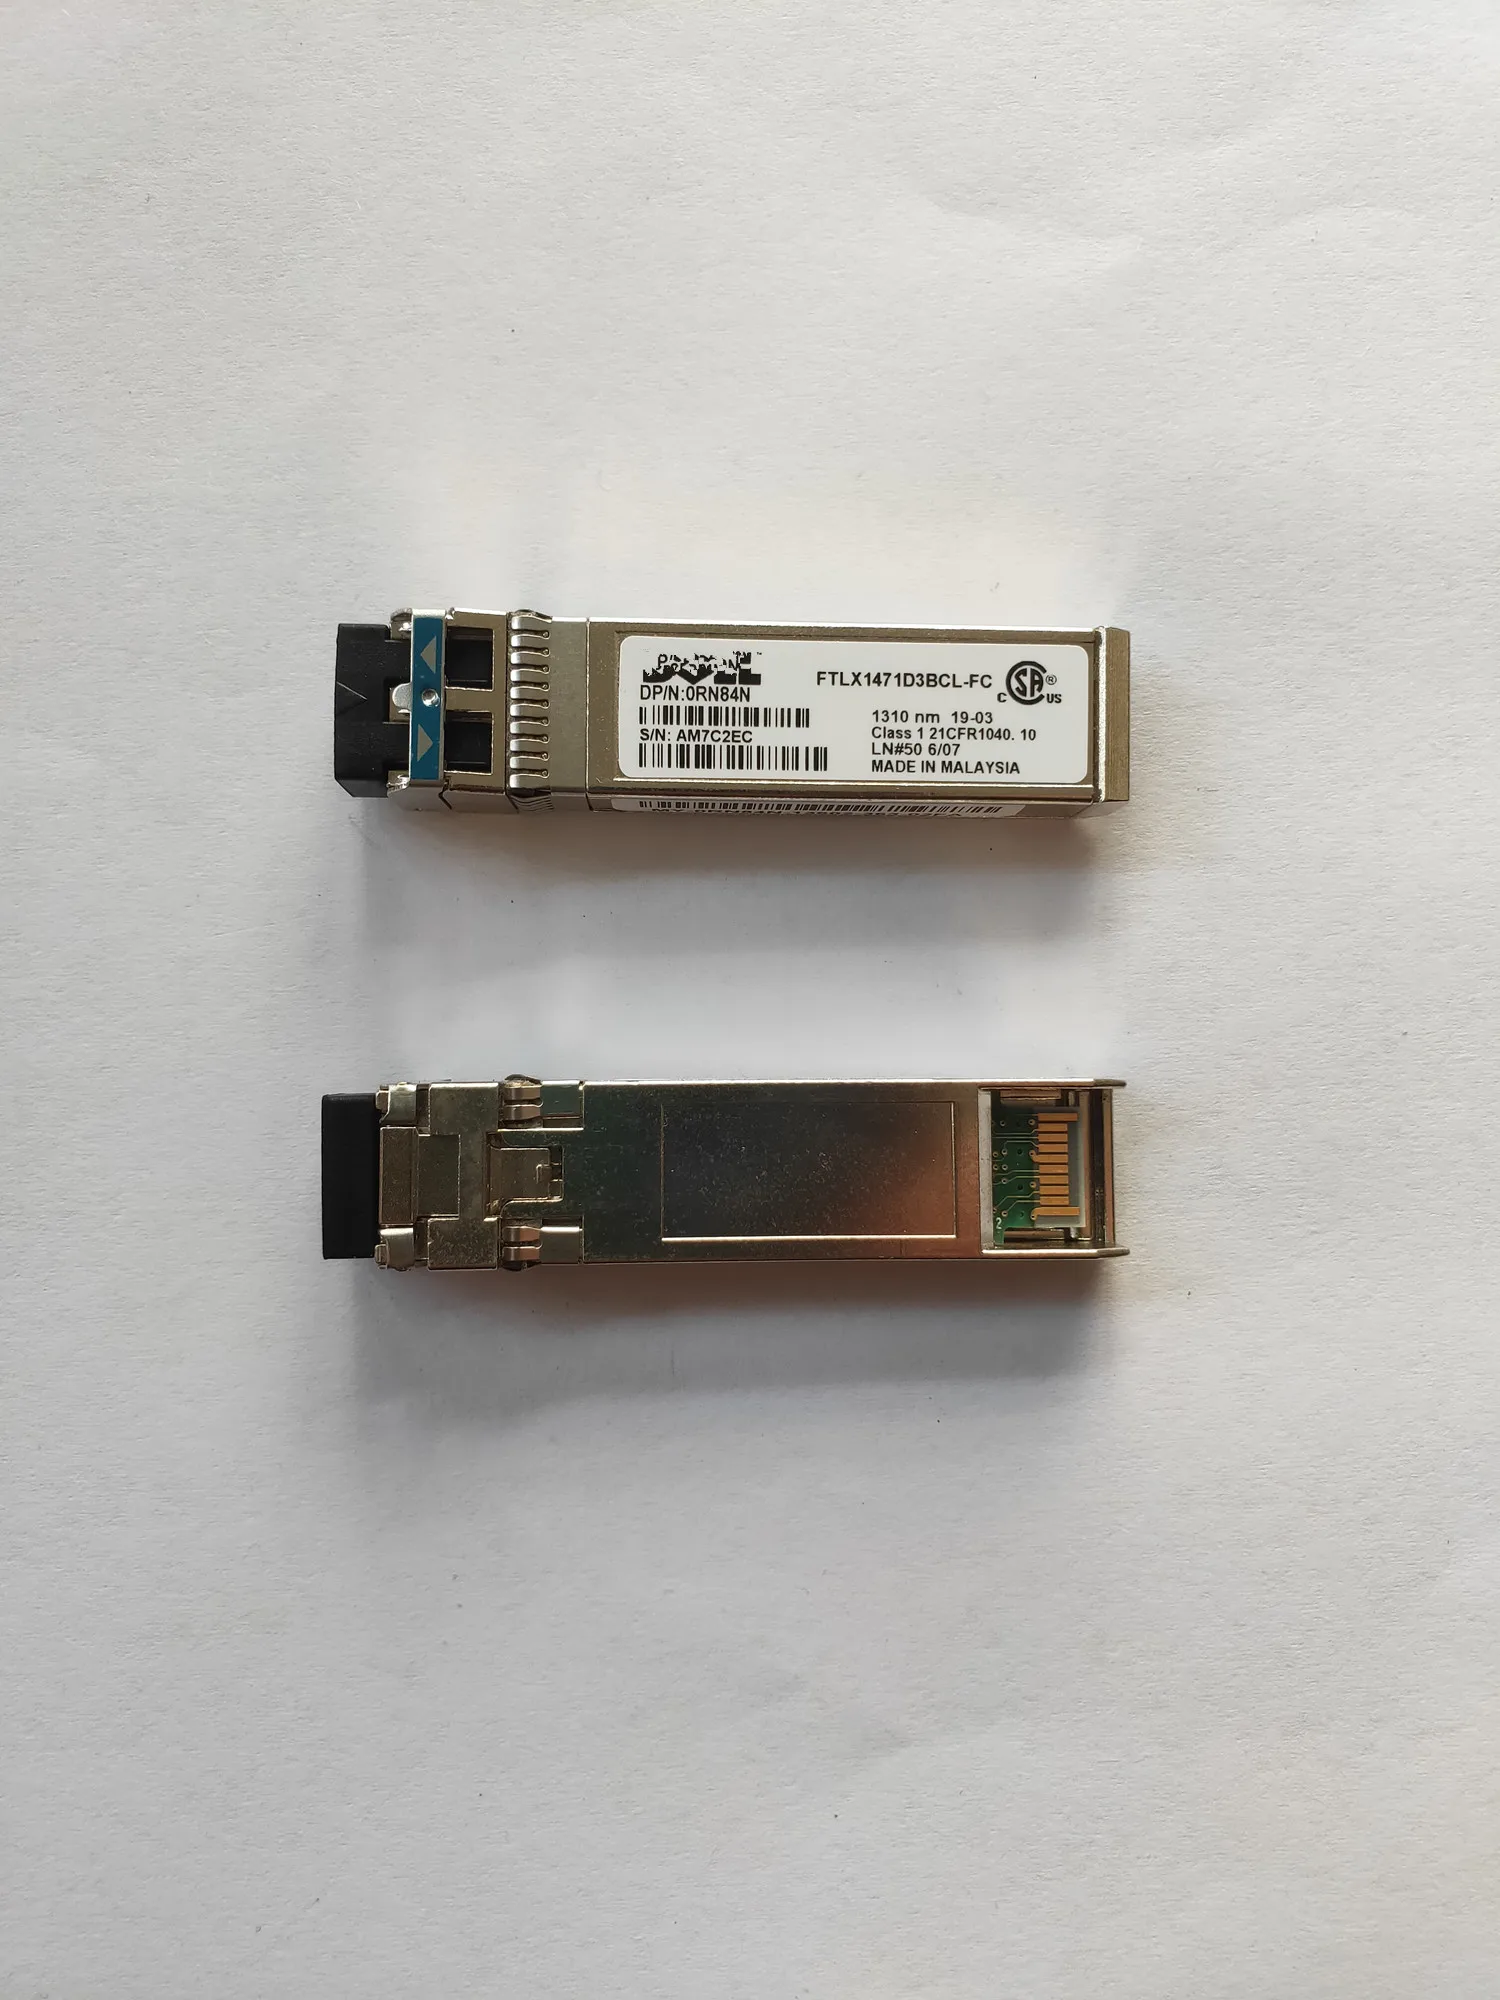 Single mode sfp 10g 10KM/0RN84N/FTLX1471D3BCL-FC/LR 10gb sfp 1310nm  transceiver switch enlarge